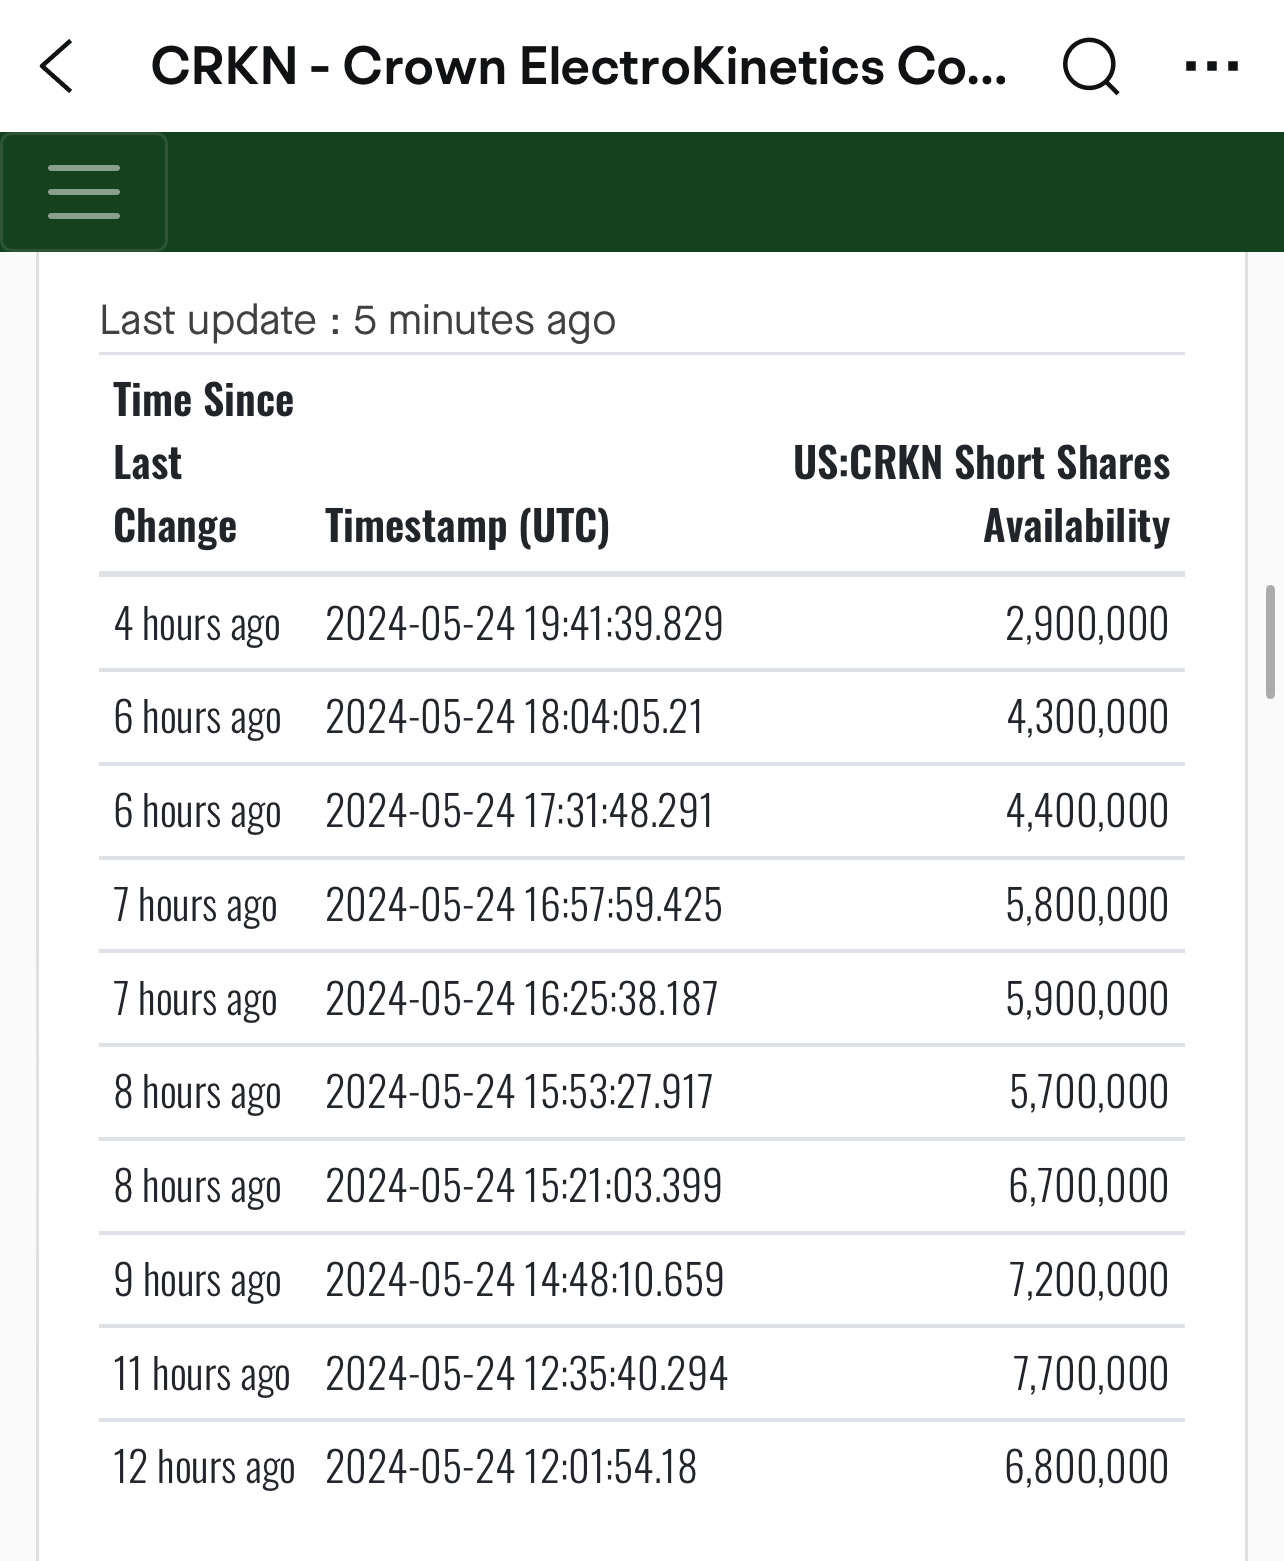 Latest short shares availability going into overnight and happy weekend 👀 see all Tuesday